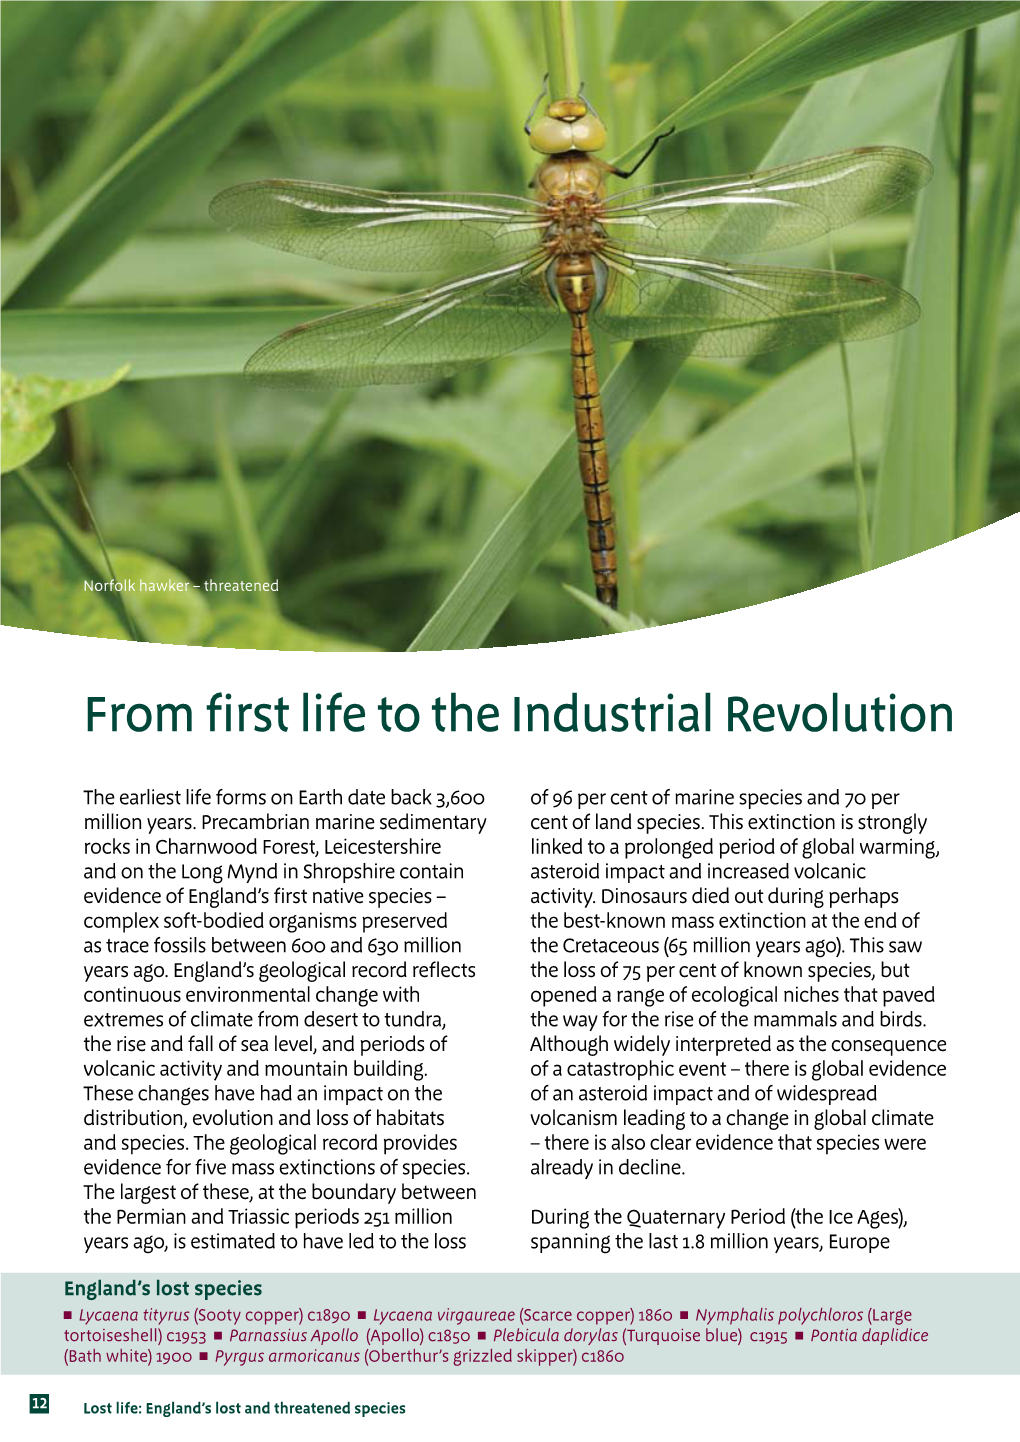 From First Life to the Industrial Revolution